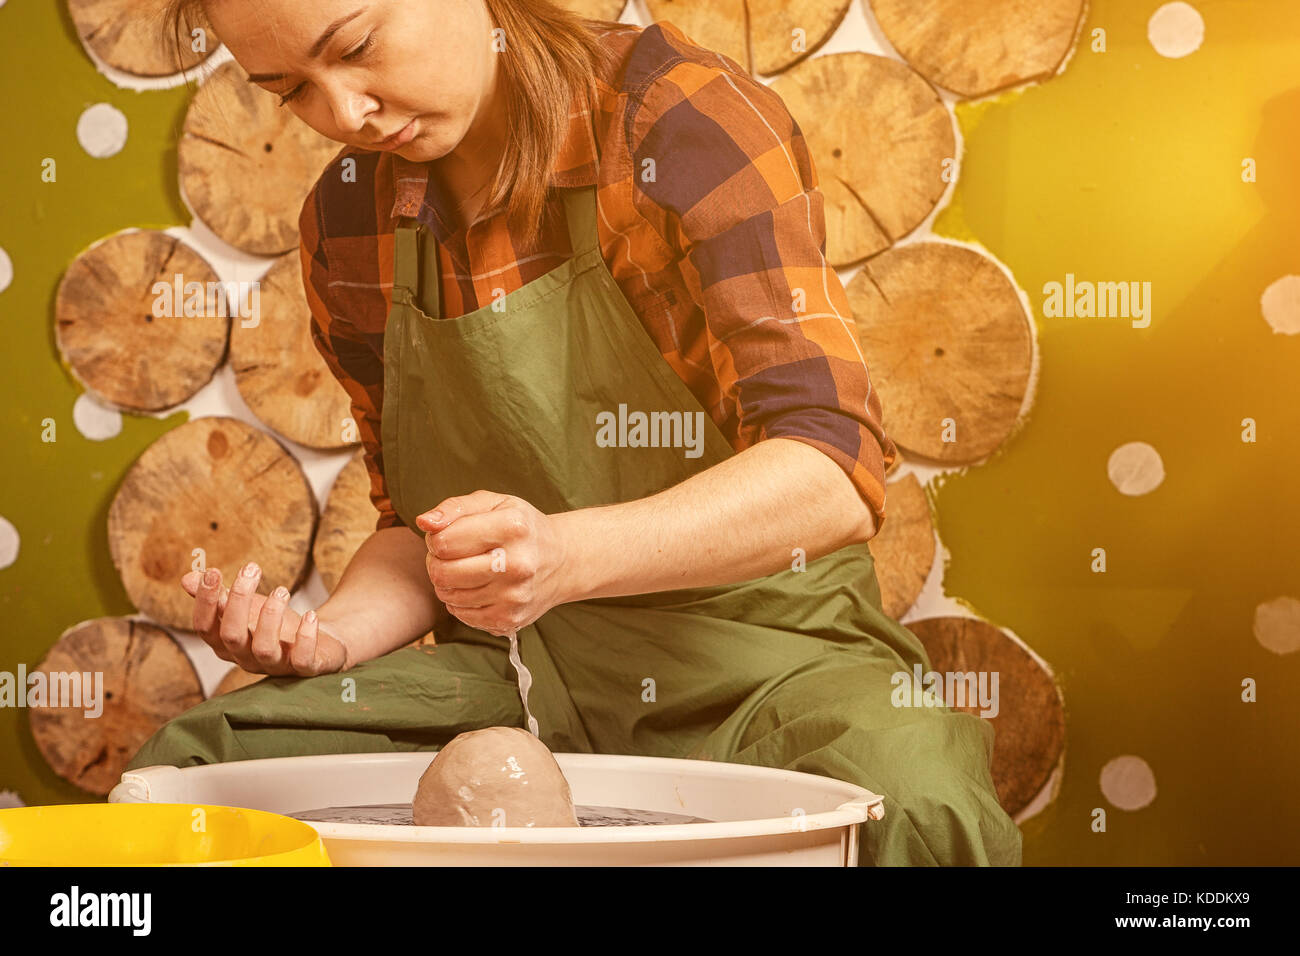 A young woman in a plaid shirt and jeans pours water on the clay to soften it and make a bowl on a potter's wheel in a bright, beautiful workshop deco Stock Photo